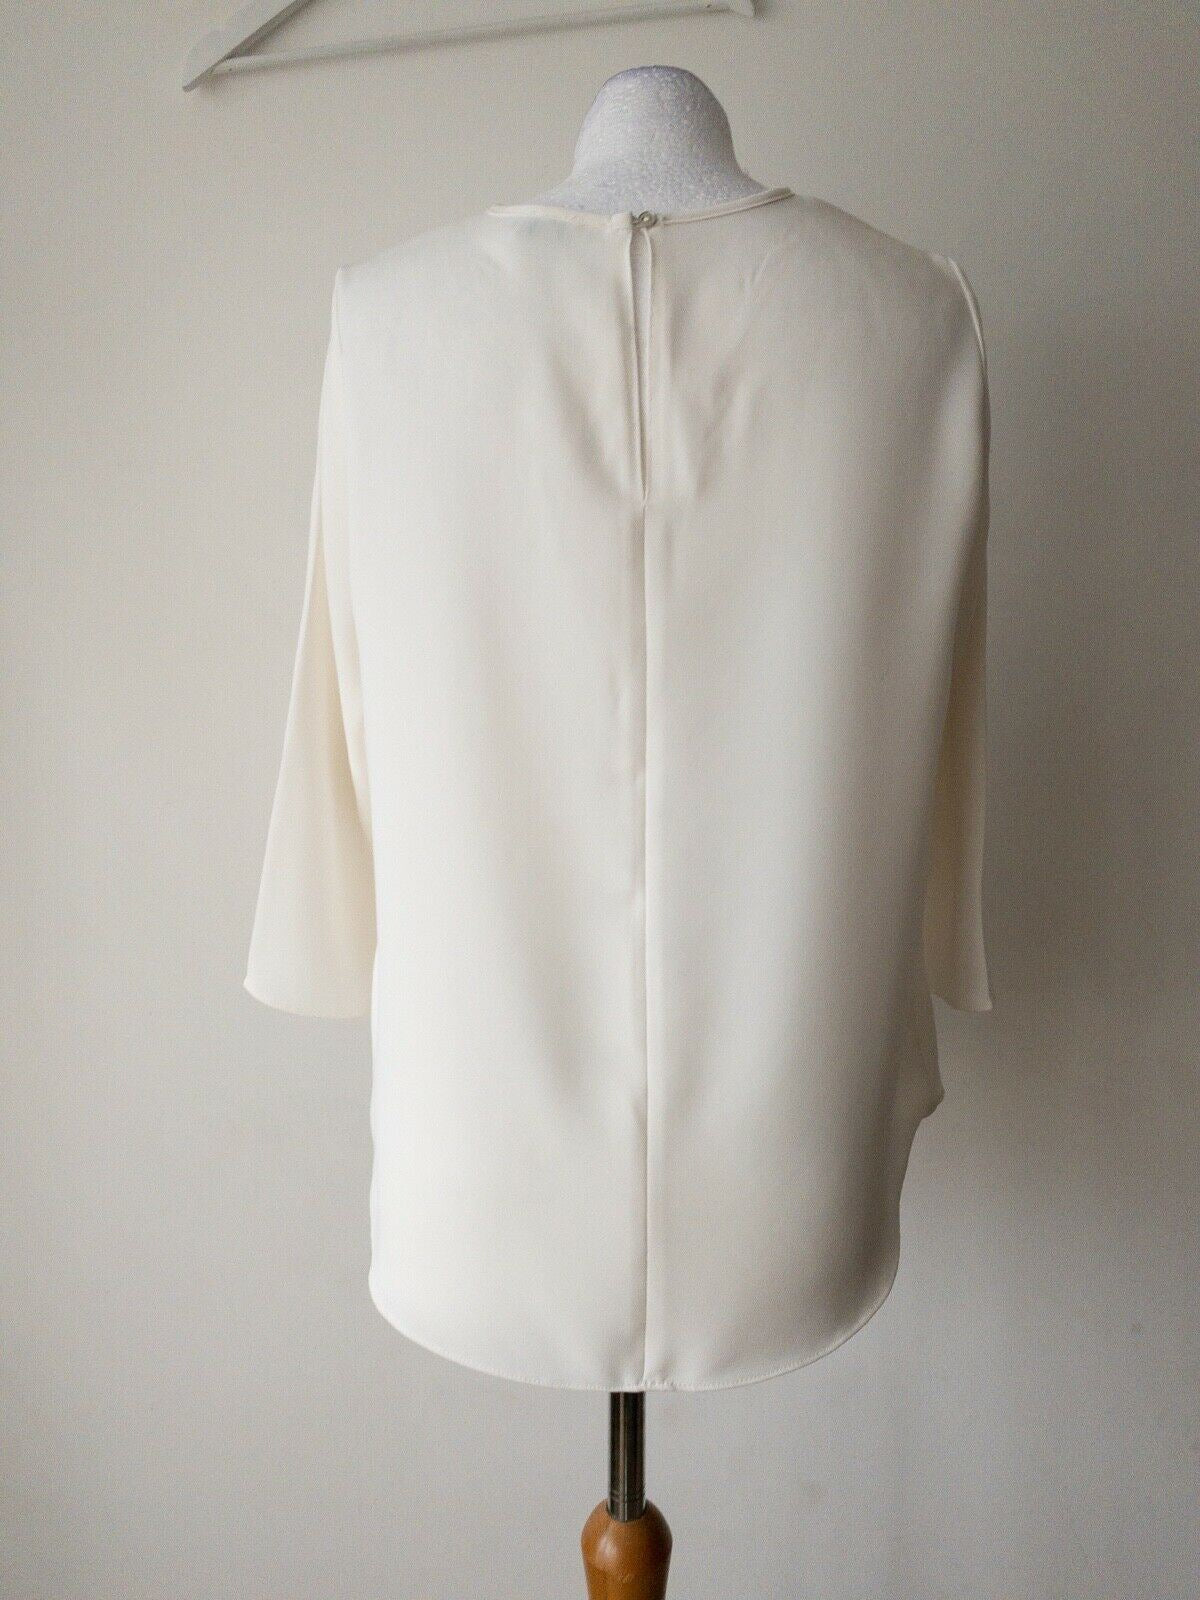 River Island Key Hole Tie Front Blouse Size 6 would fit 8 10 Oversized